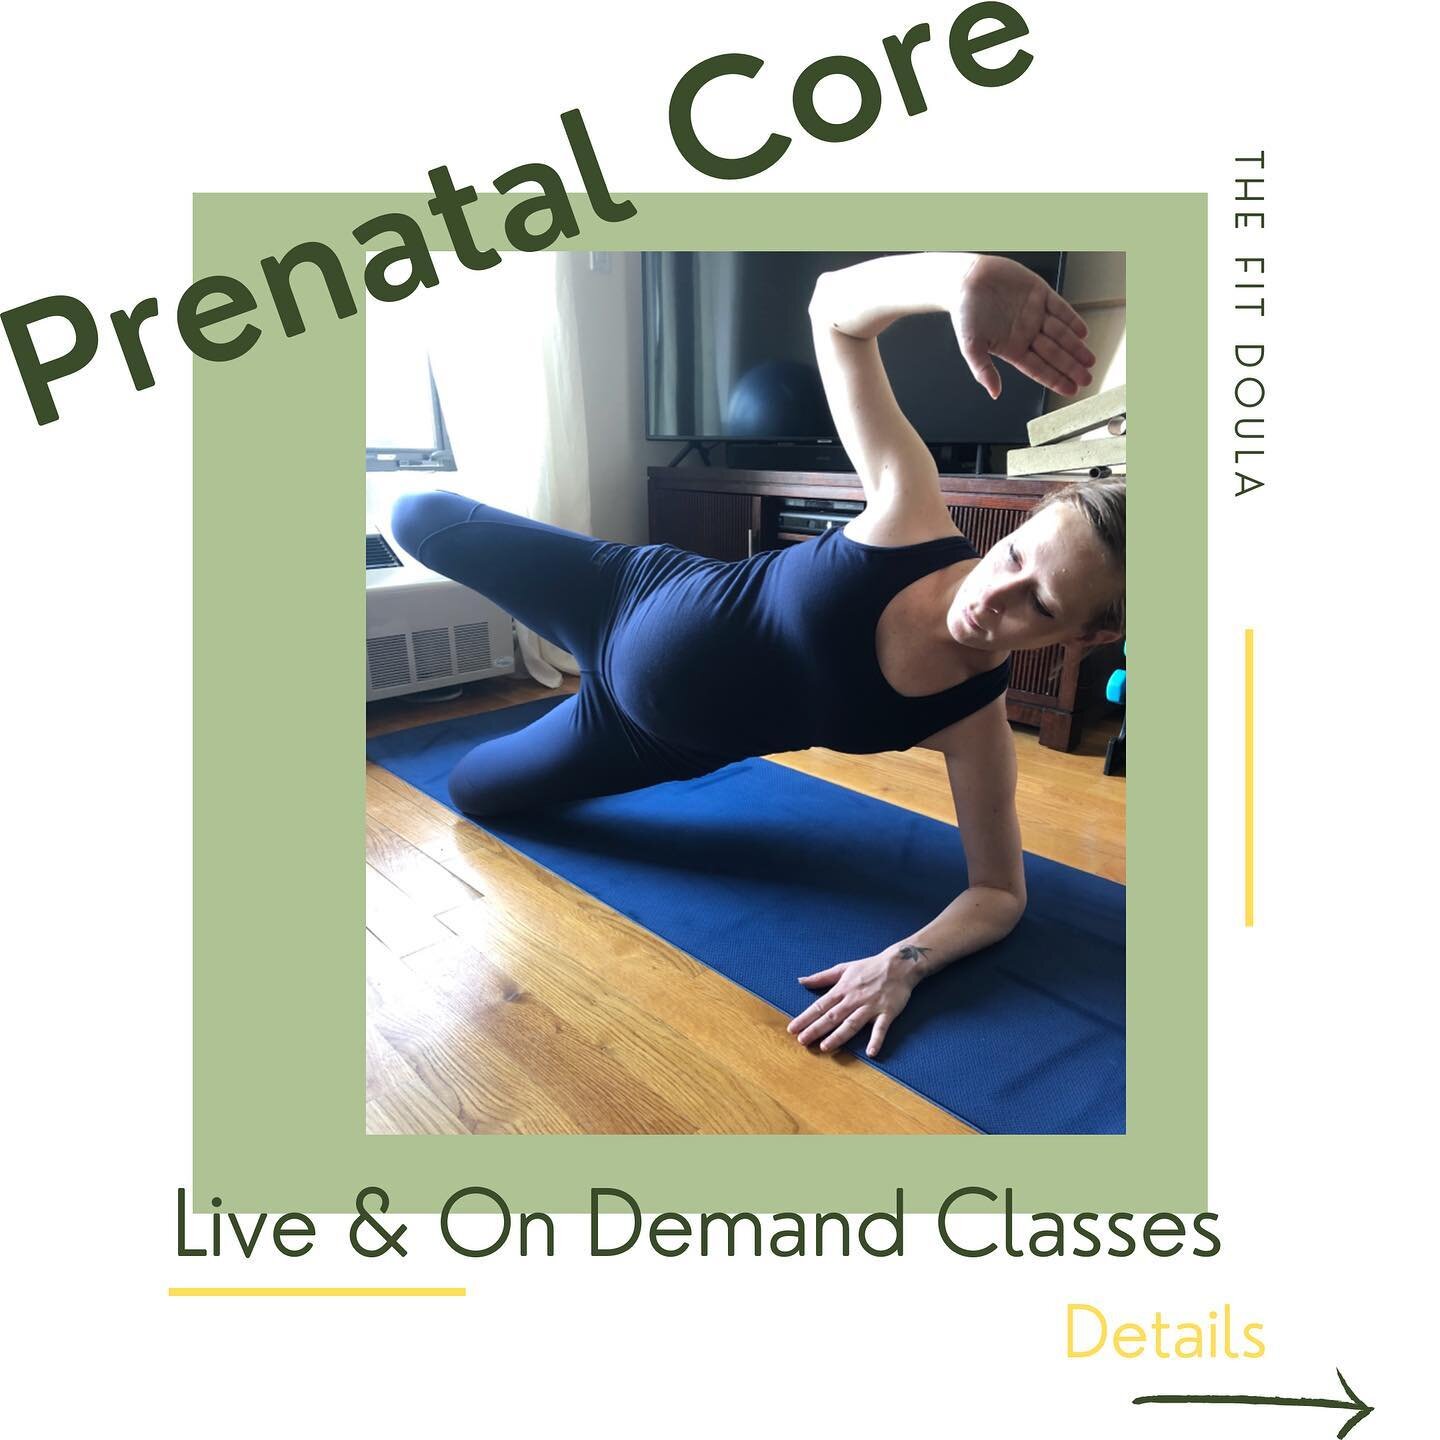 Prenatal Core is baaaack!!
Sign up for classes now, with the link in my bio.
#yourpregnancyisawellness #thefitdoula